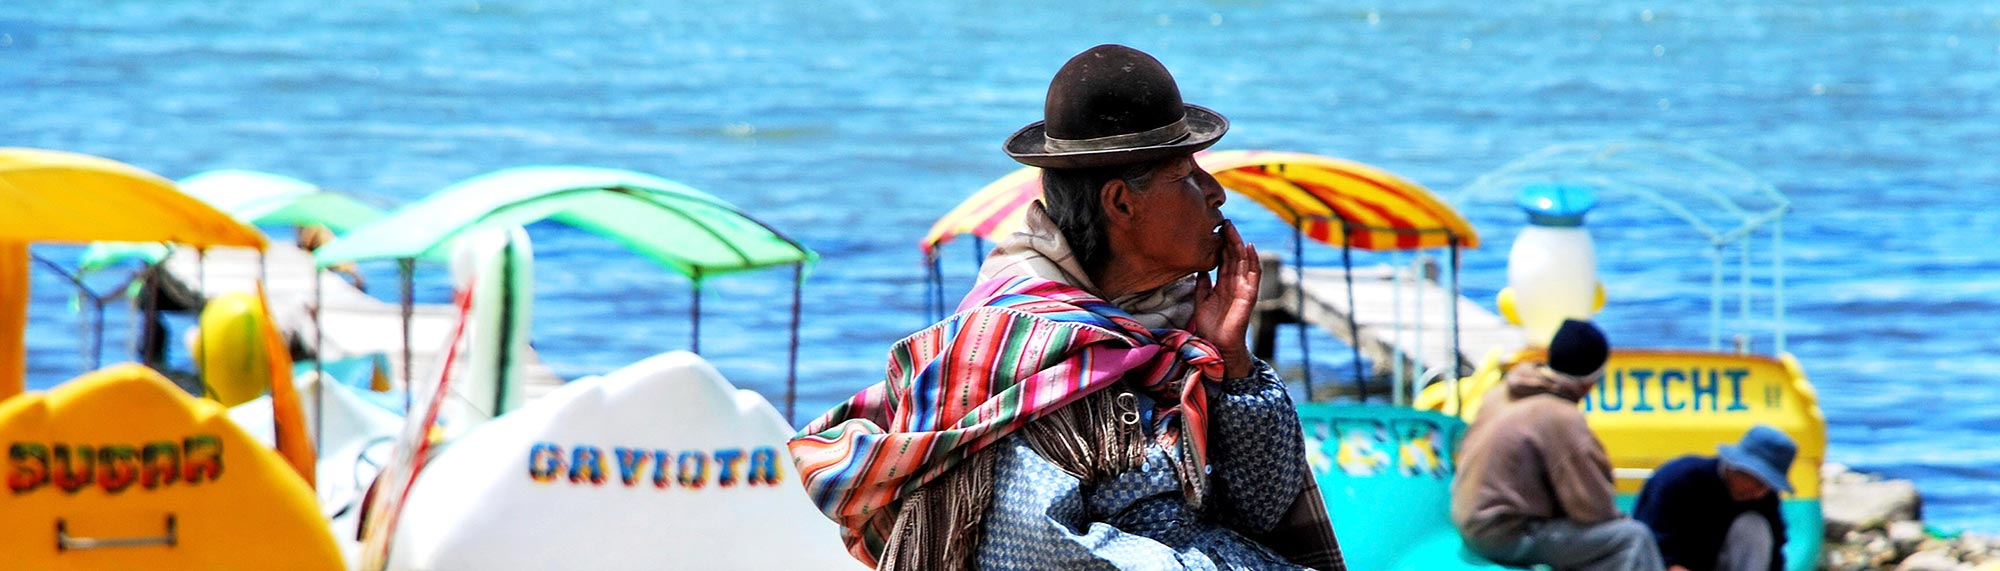 Old woman in Bolivia